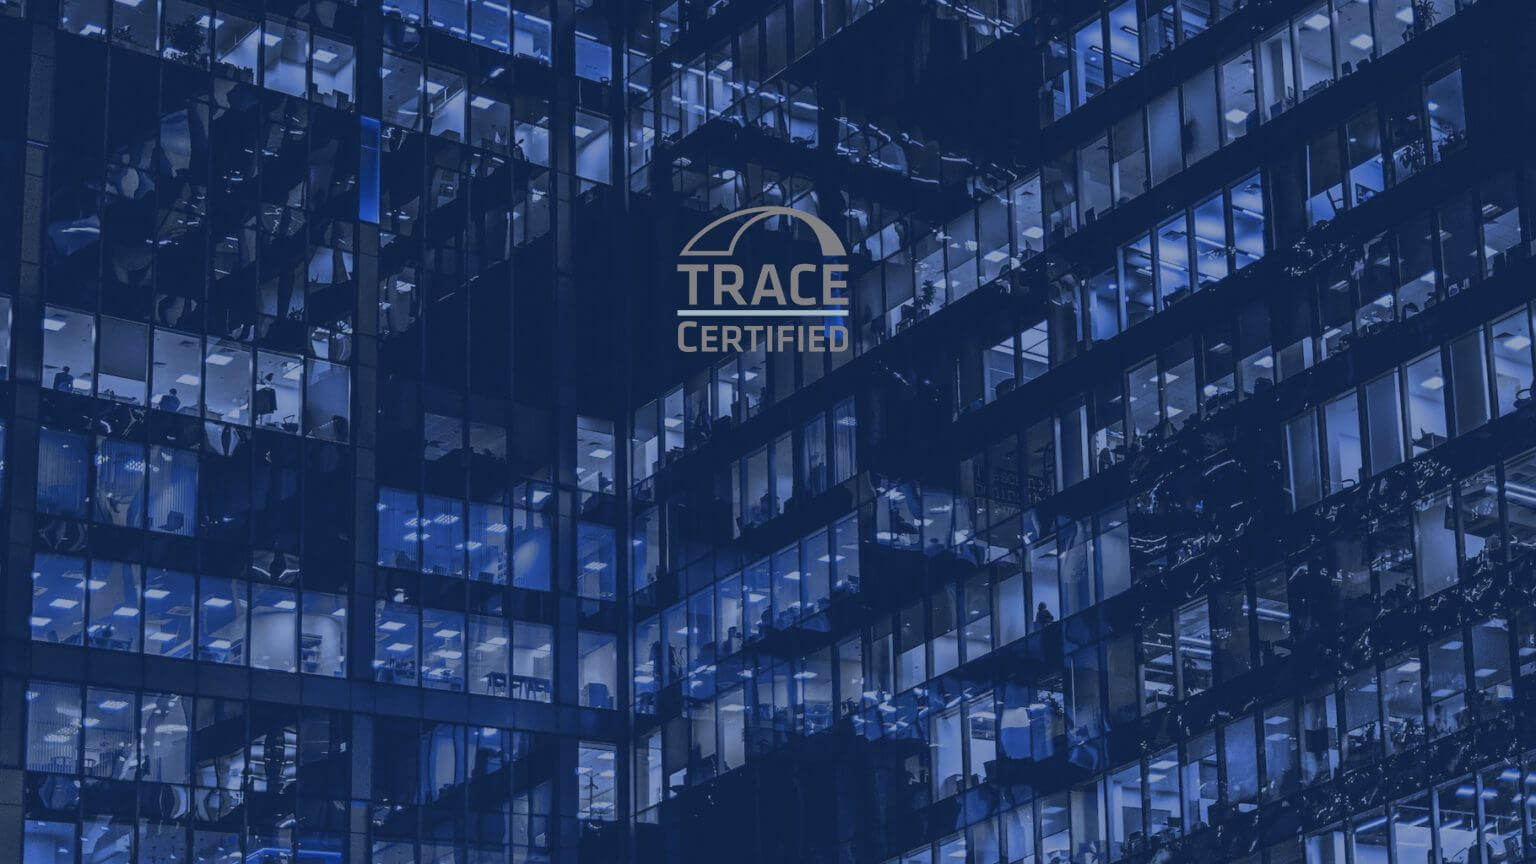 HTR Refactories Belgrade | HTR is officially a TRACE Certified company